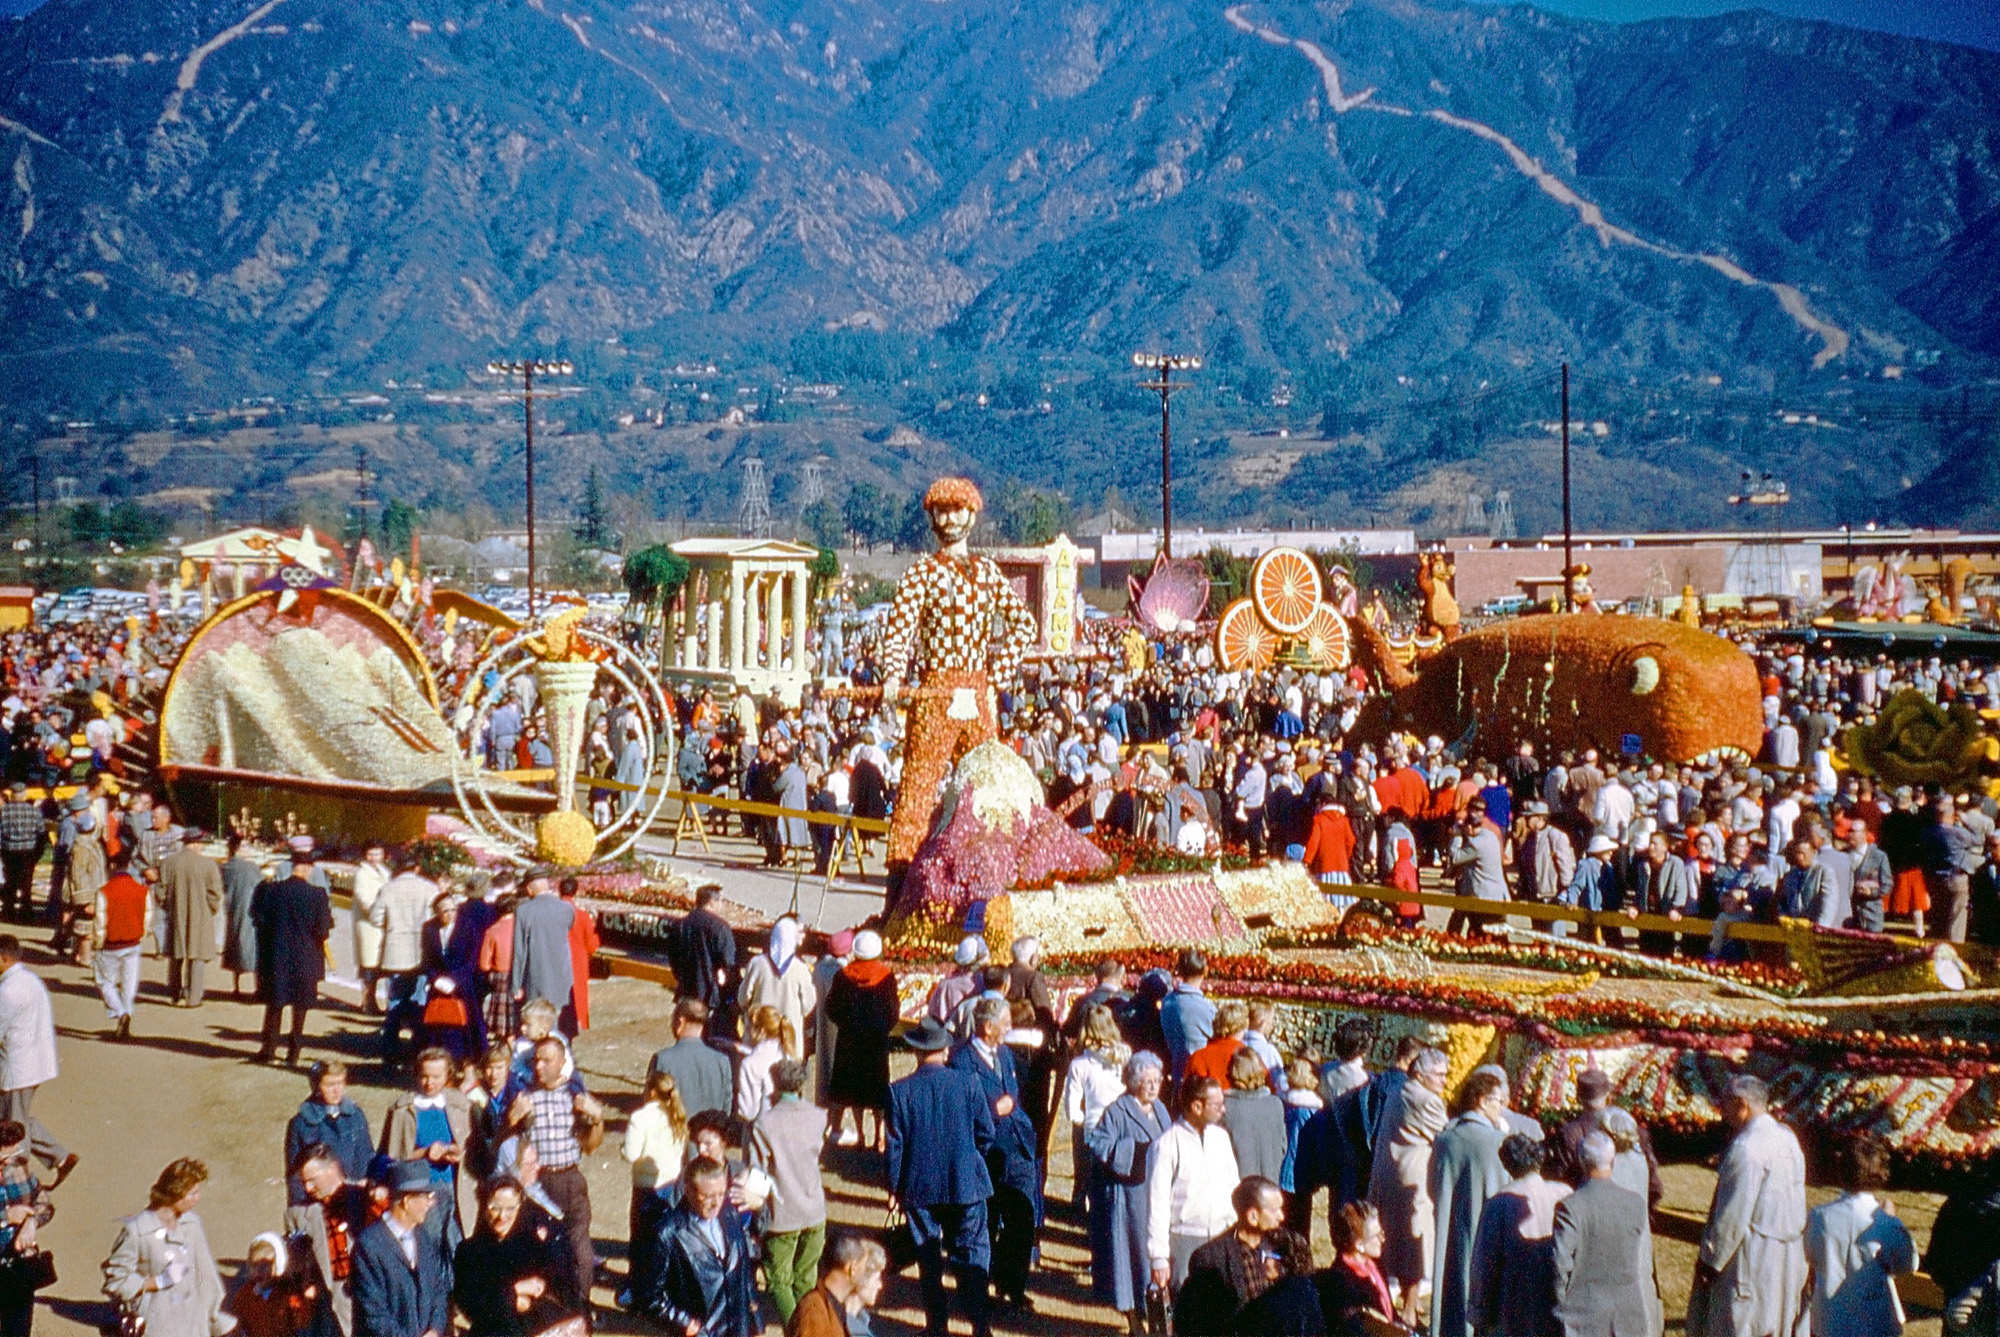 From a large batch of found slides comes this Kodachrome slide of Rose Parade floats in a park. The slide mount has a date stamp of Sept. 61. View full size.